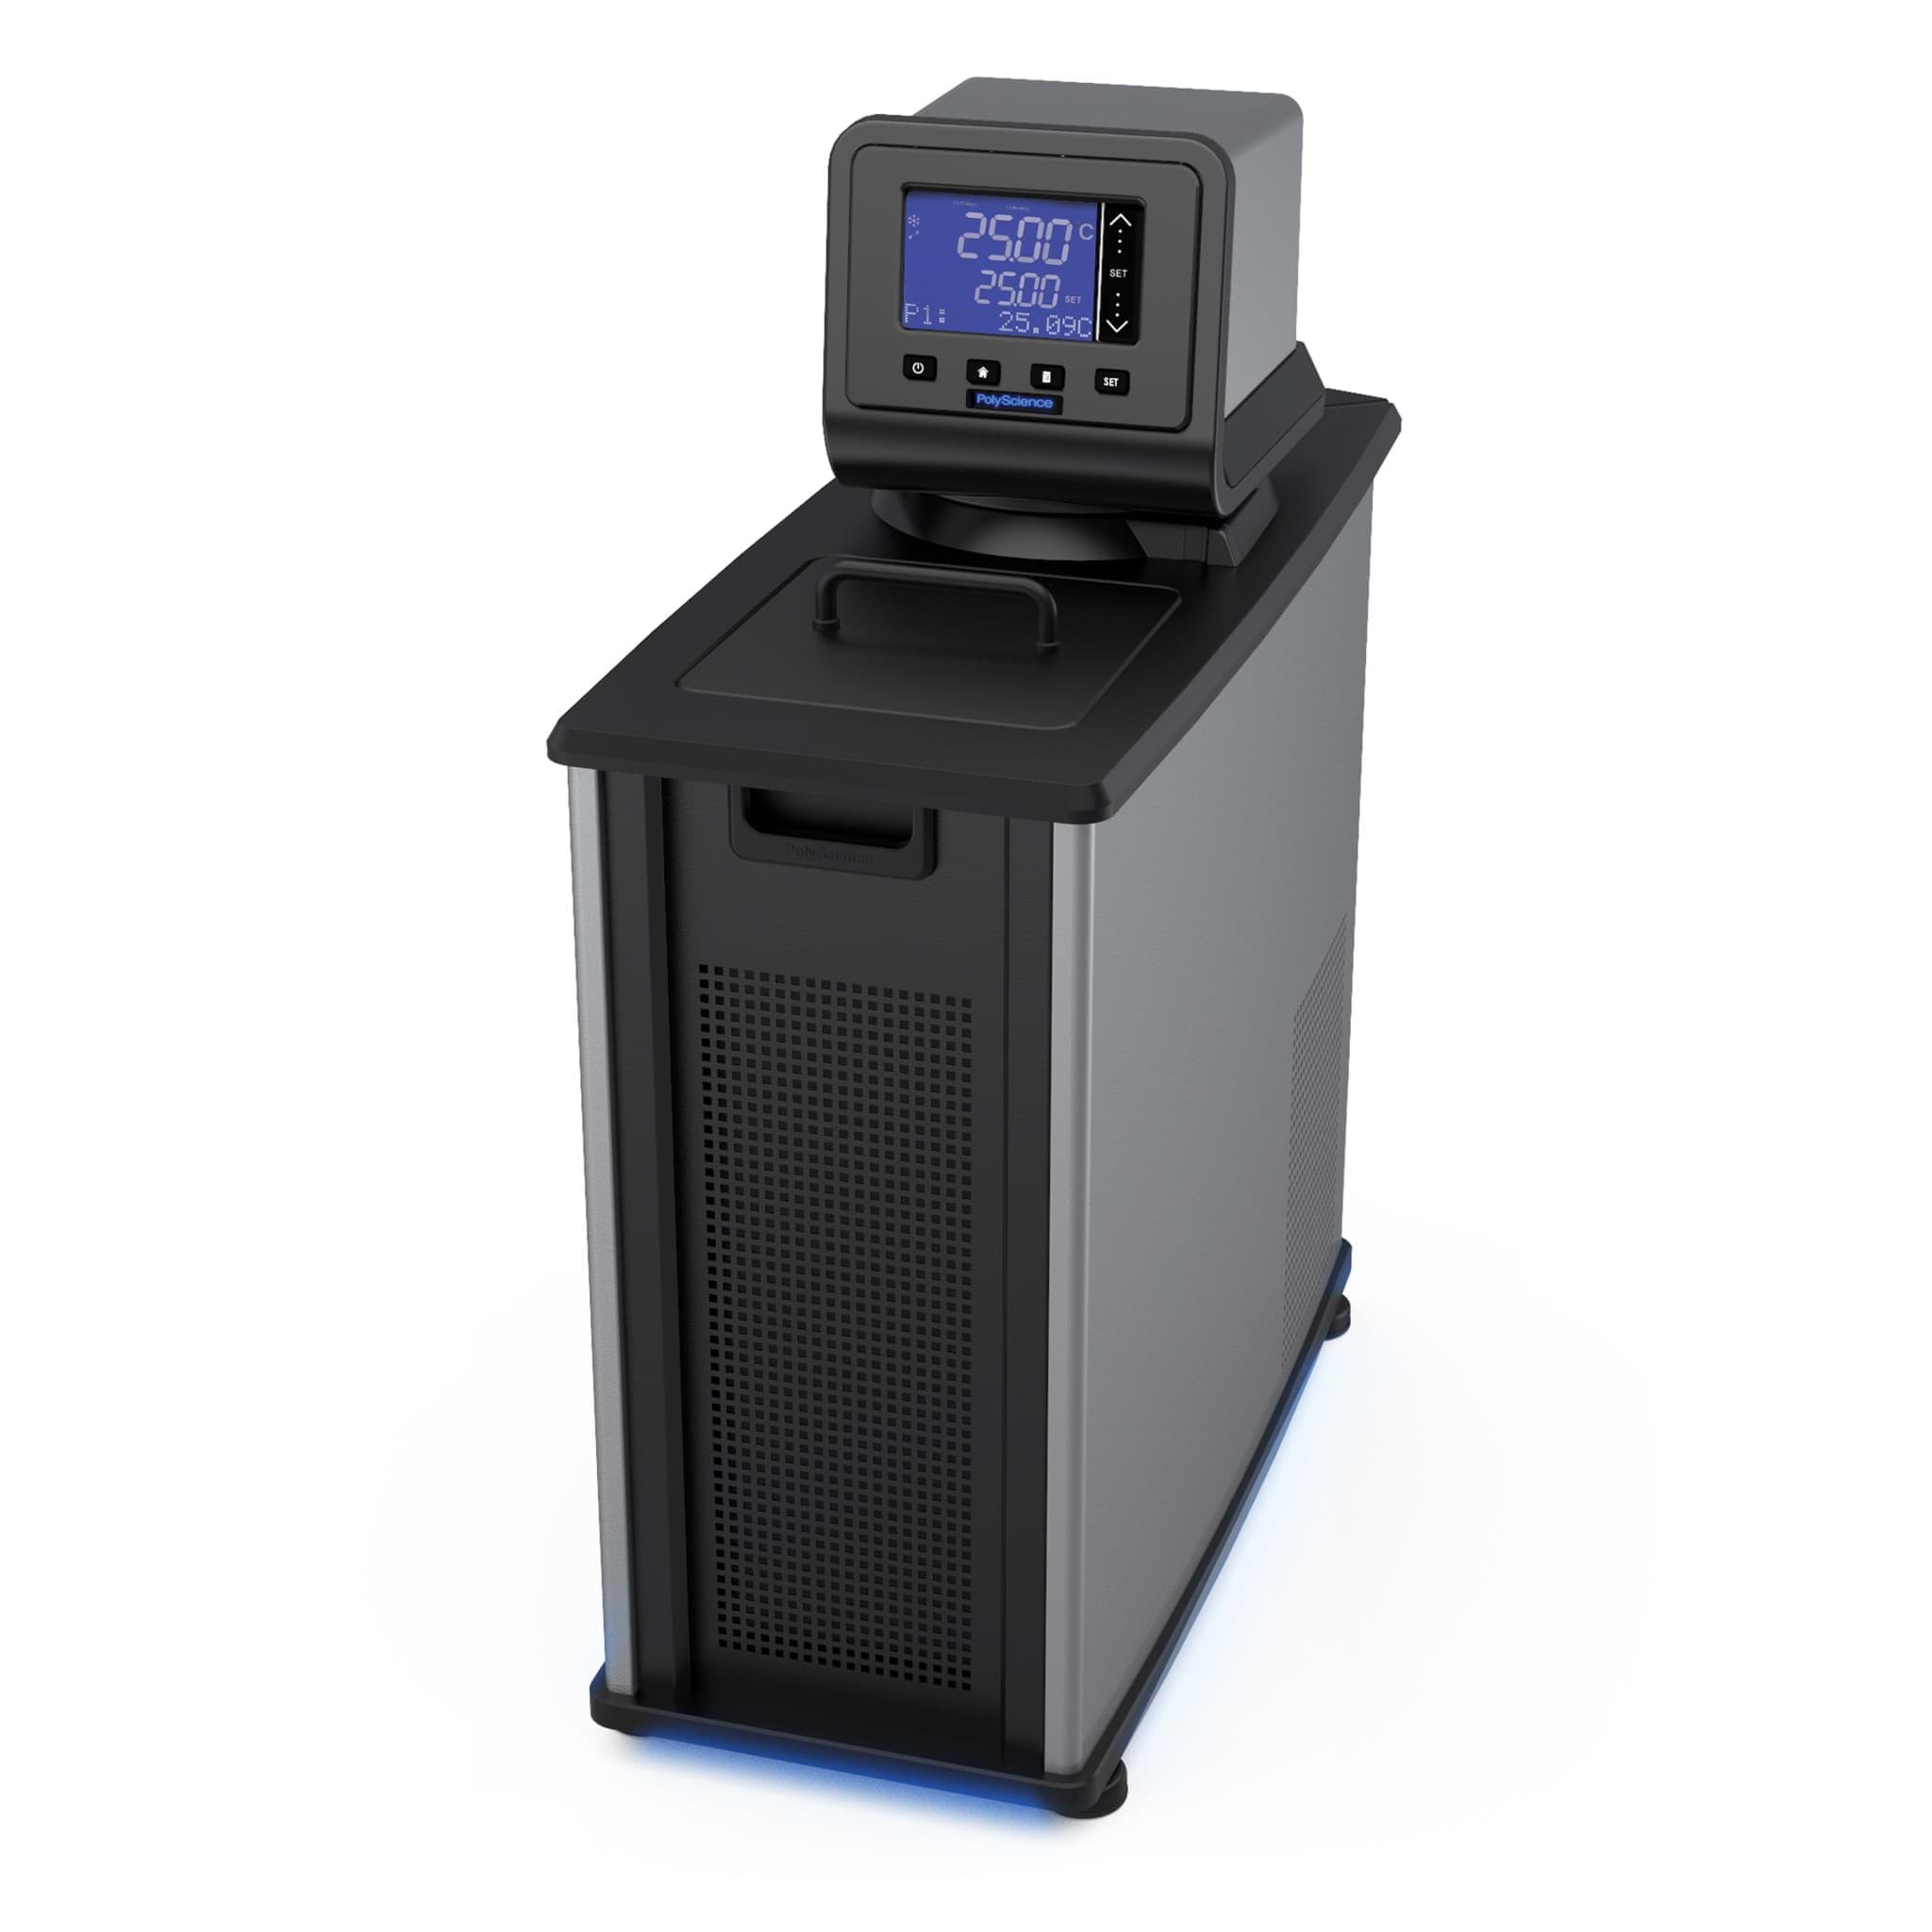 Picture of PolyScience 7L Space-Saving Refrigerated Circulator, Advanced Digital Controller (-40° to 200°C), 120V, 60Hz